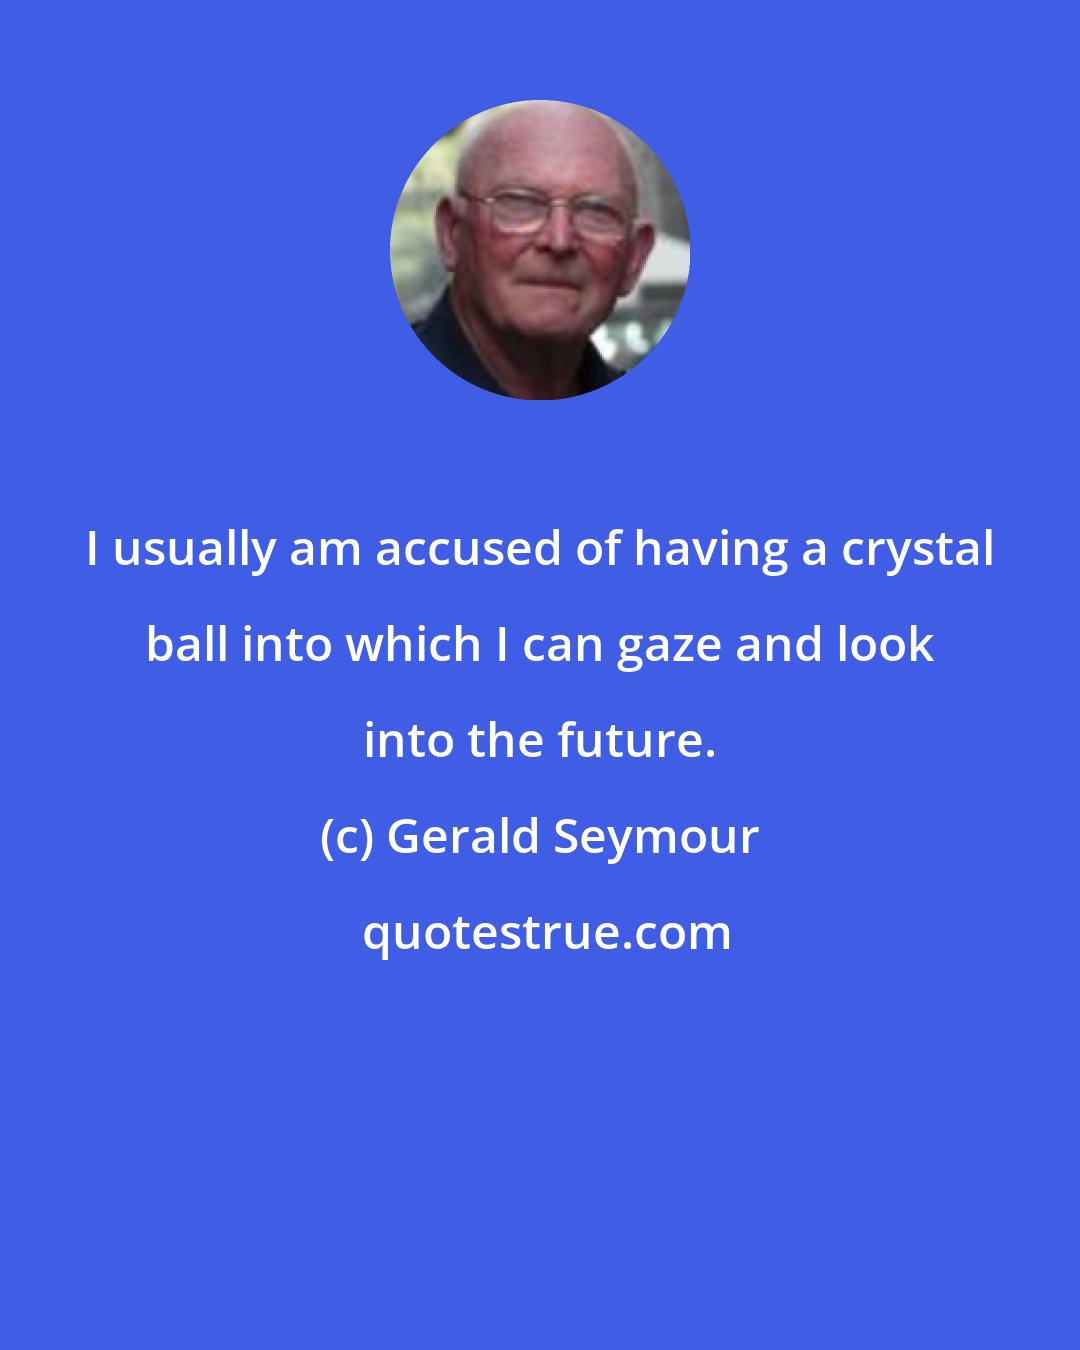 Gerald Seymour: I usually am accused of having a crystal ball into which I can gaze and look into the future.